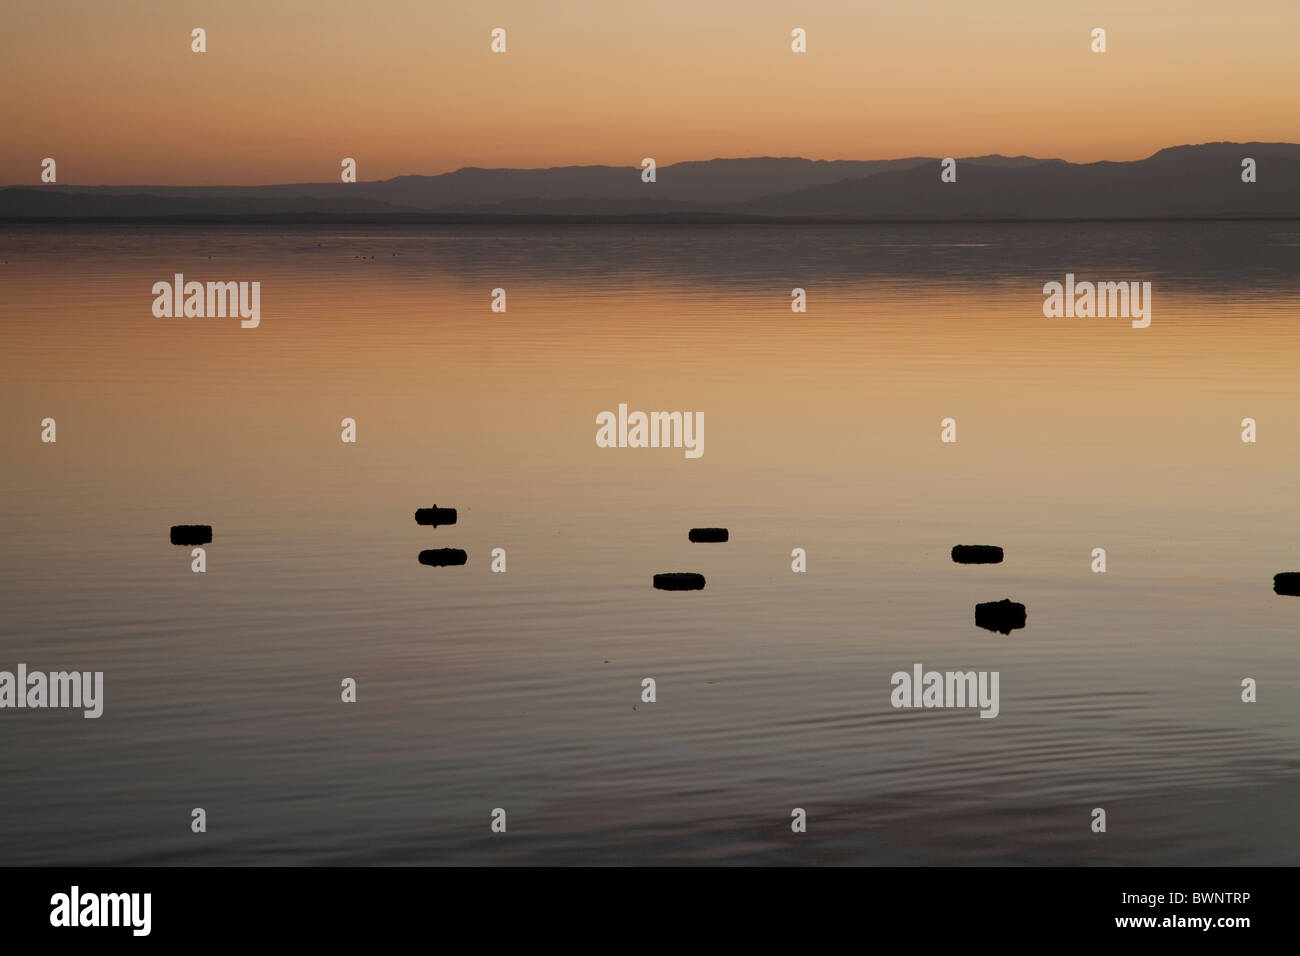 Horizontal image of stumps sticking out of the water on a glassy lake. Stock Photo